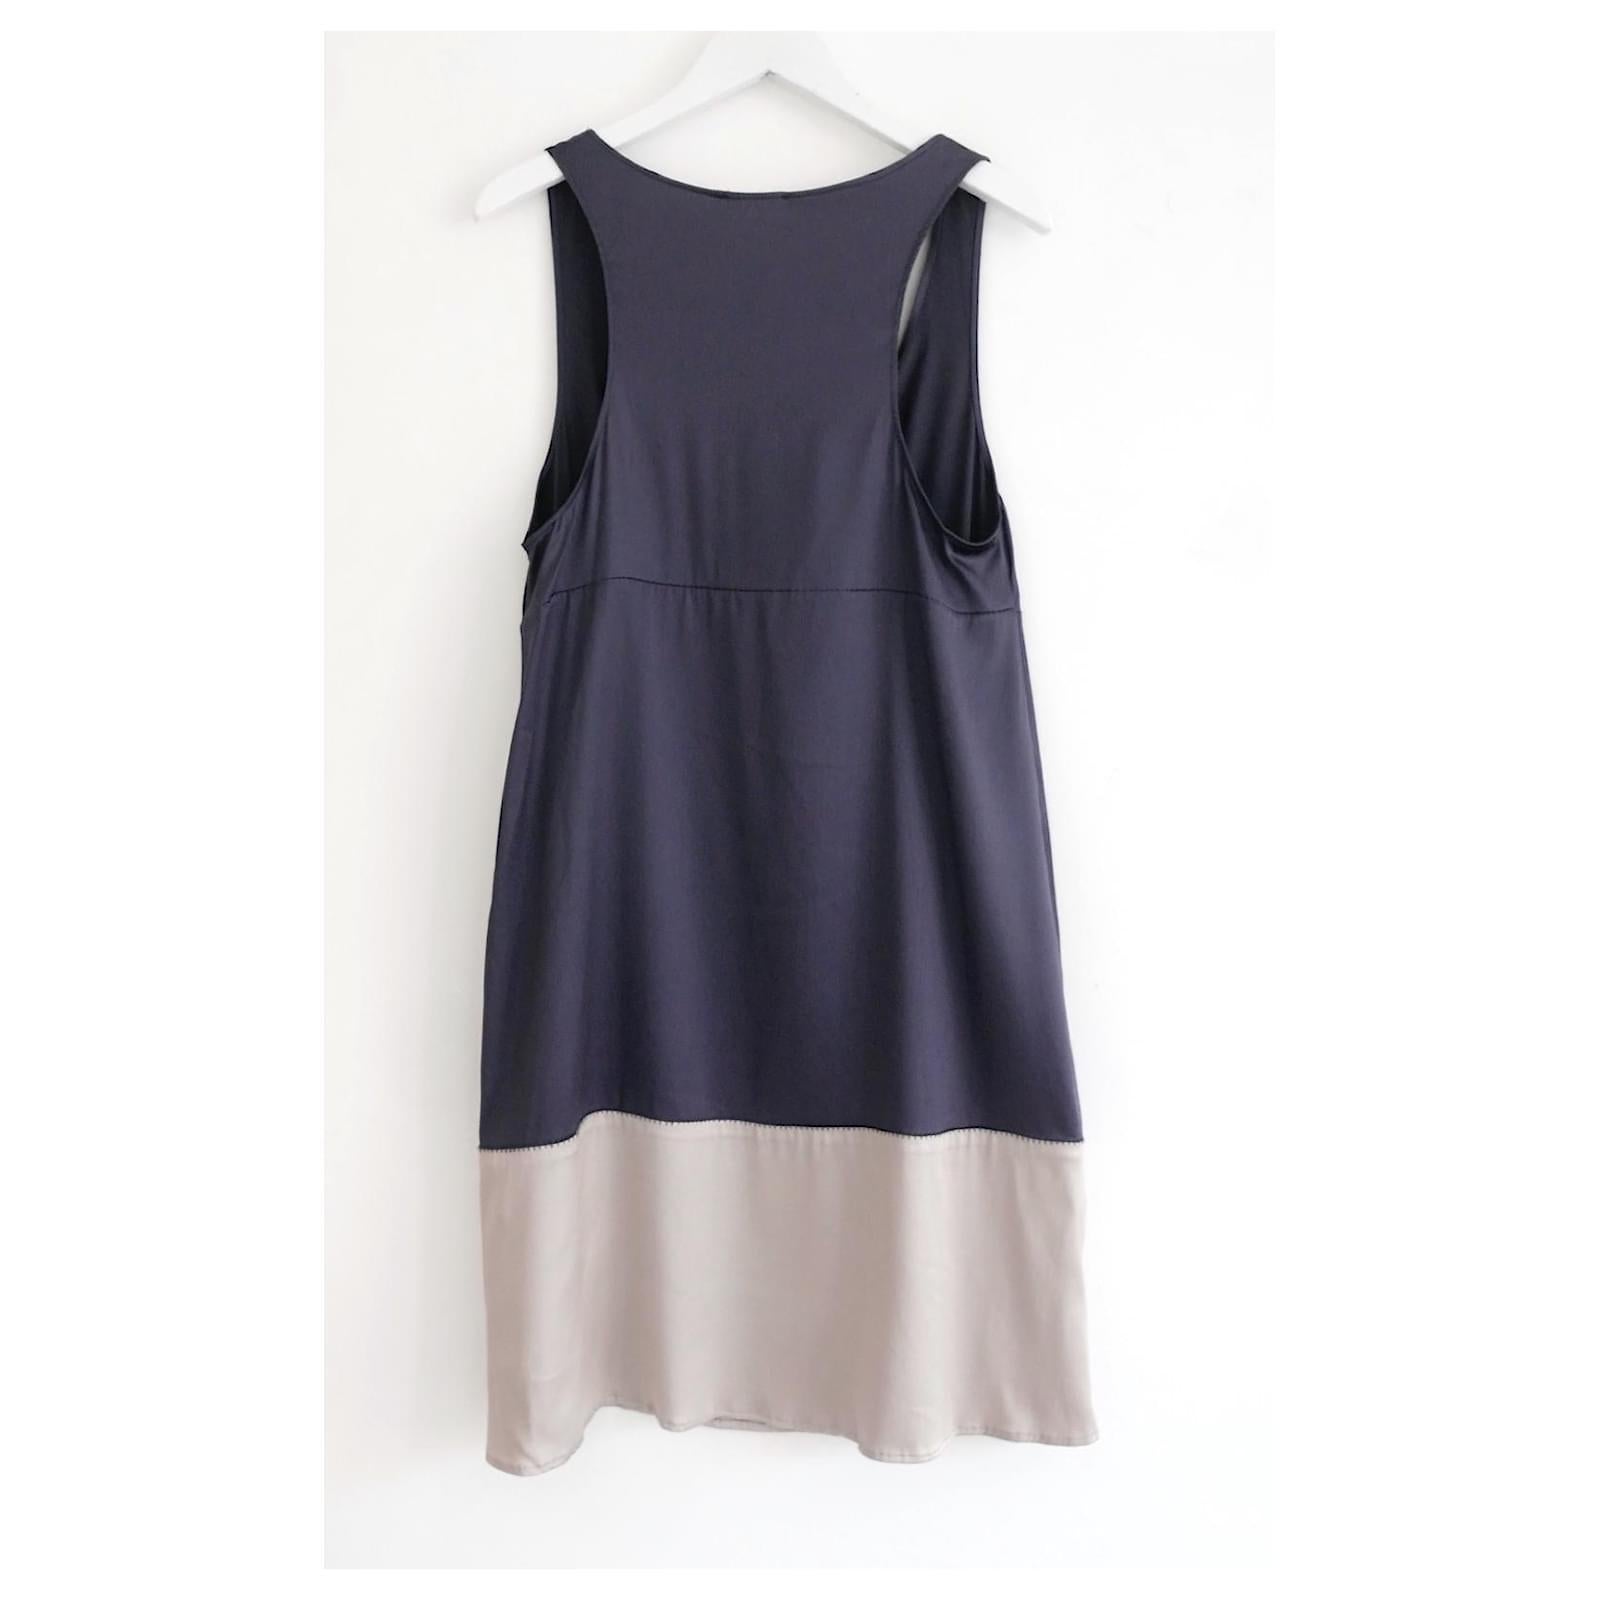 Gorgeous Marni vintage slip dress - from Spring 2006 and worn once. Made from super soft blue/grey and beige silk with a soft, a-line fit and racer back. Size 1. Approx measurements - bust 32”, hips 42” and length 32.5”.
